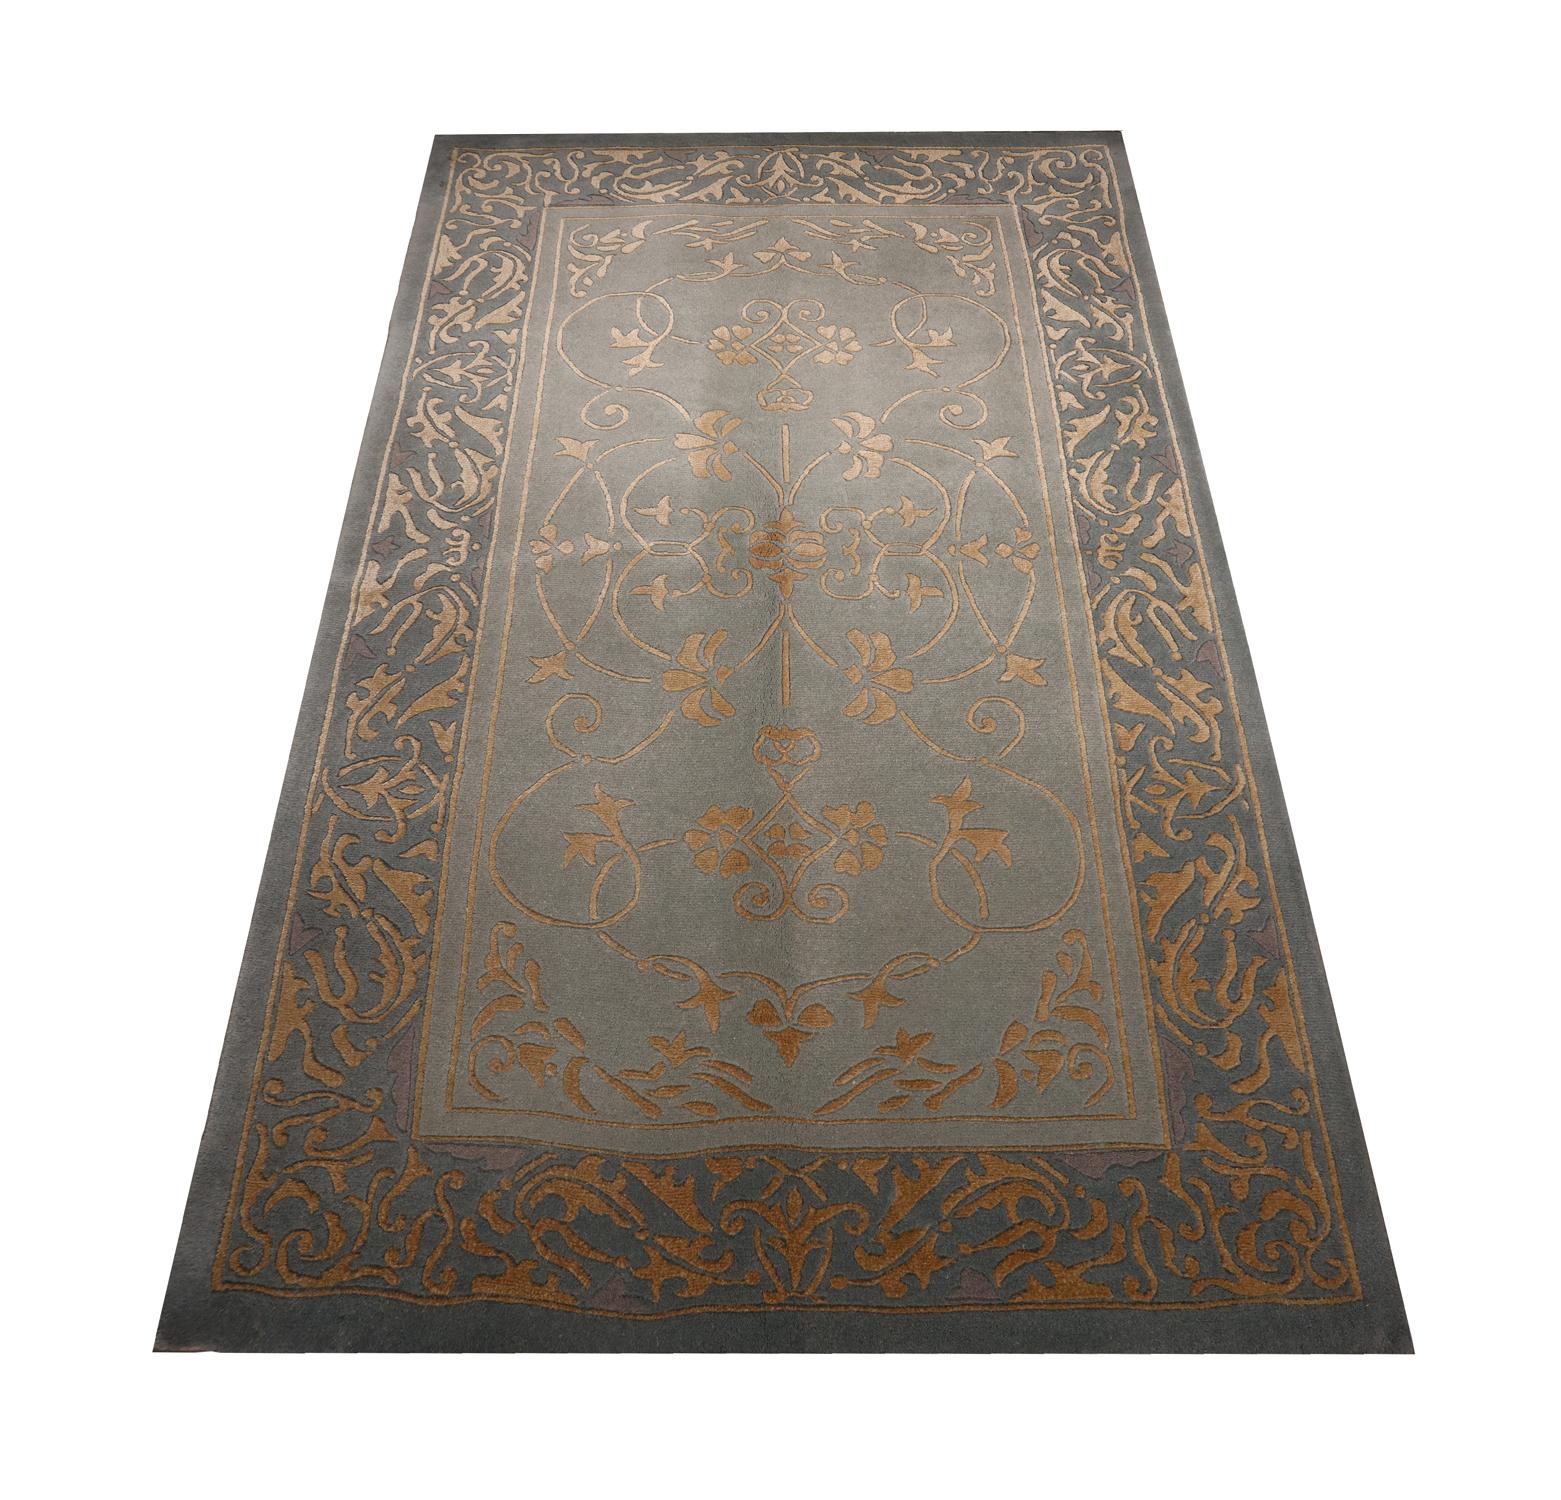 This fine silk rug was woven by hand in India in the early 21st century. The design has been woven on a subtle grey background with gold accents, making up a symmetrical elegant design. This vintage carpet has been woven to perfection and is sure to